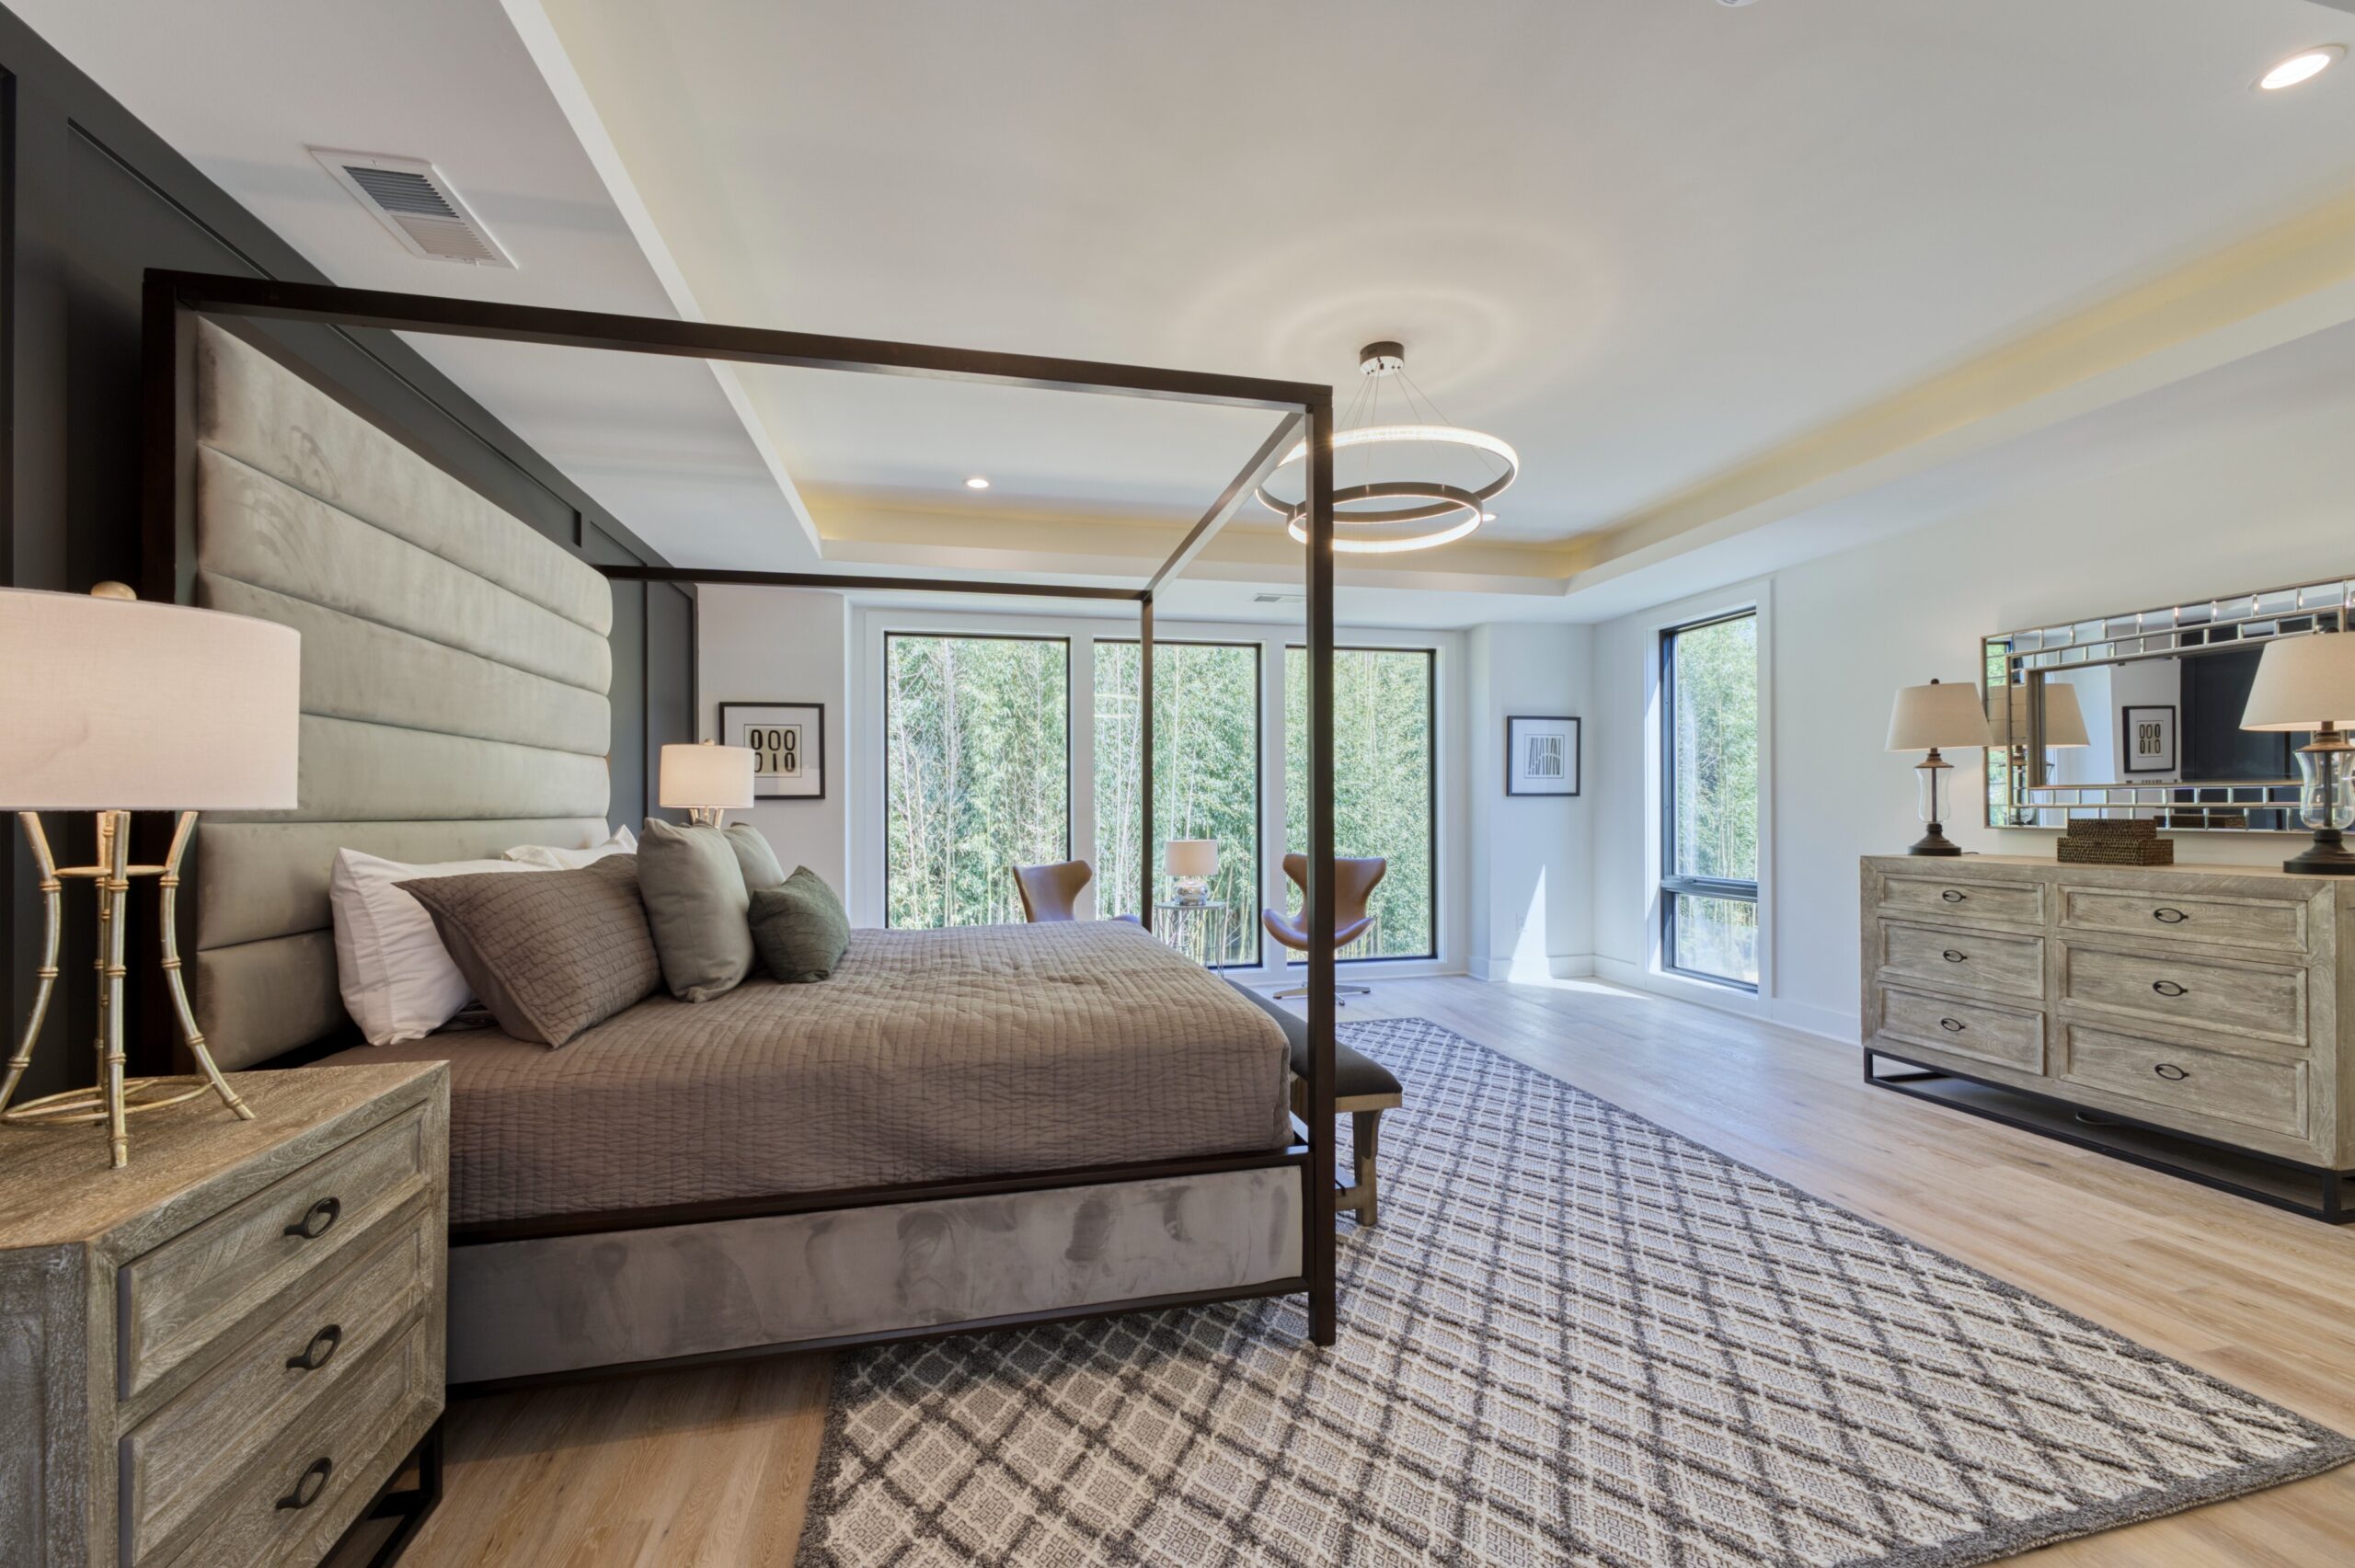 Professional interior photo of 1137 Buchanan St in McLean, VA - showing the primary bedroom with trey ceiling, large windows to the woods